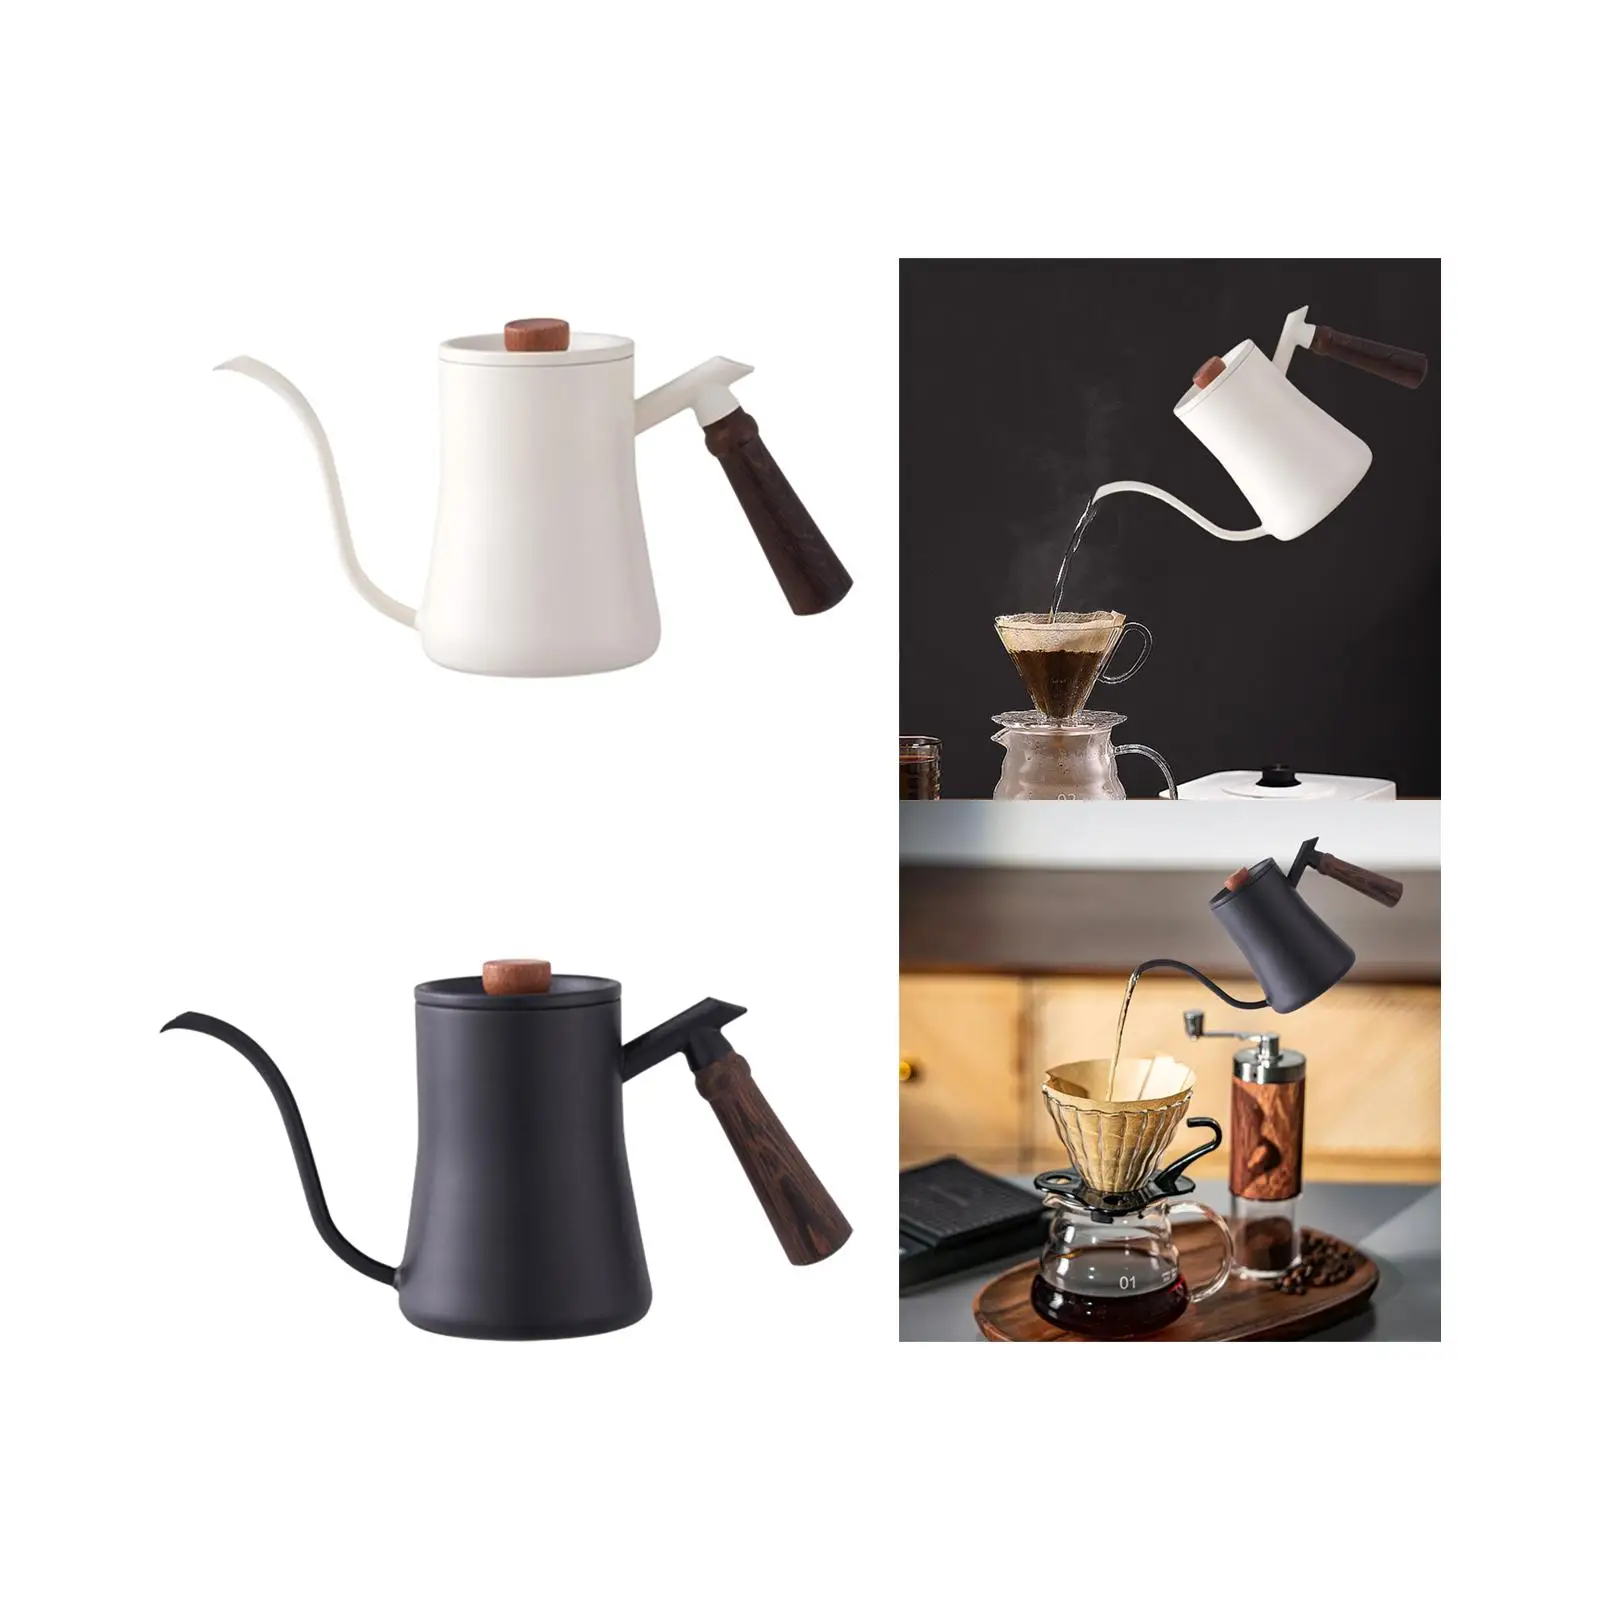 0.6 L Pour over Coffee Kettle Flow Spout Professional Durable Tea Pot Teakettle for Picnic Camping Cafe Barista Gift Cafe Bar